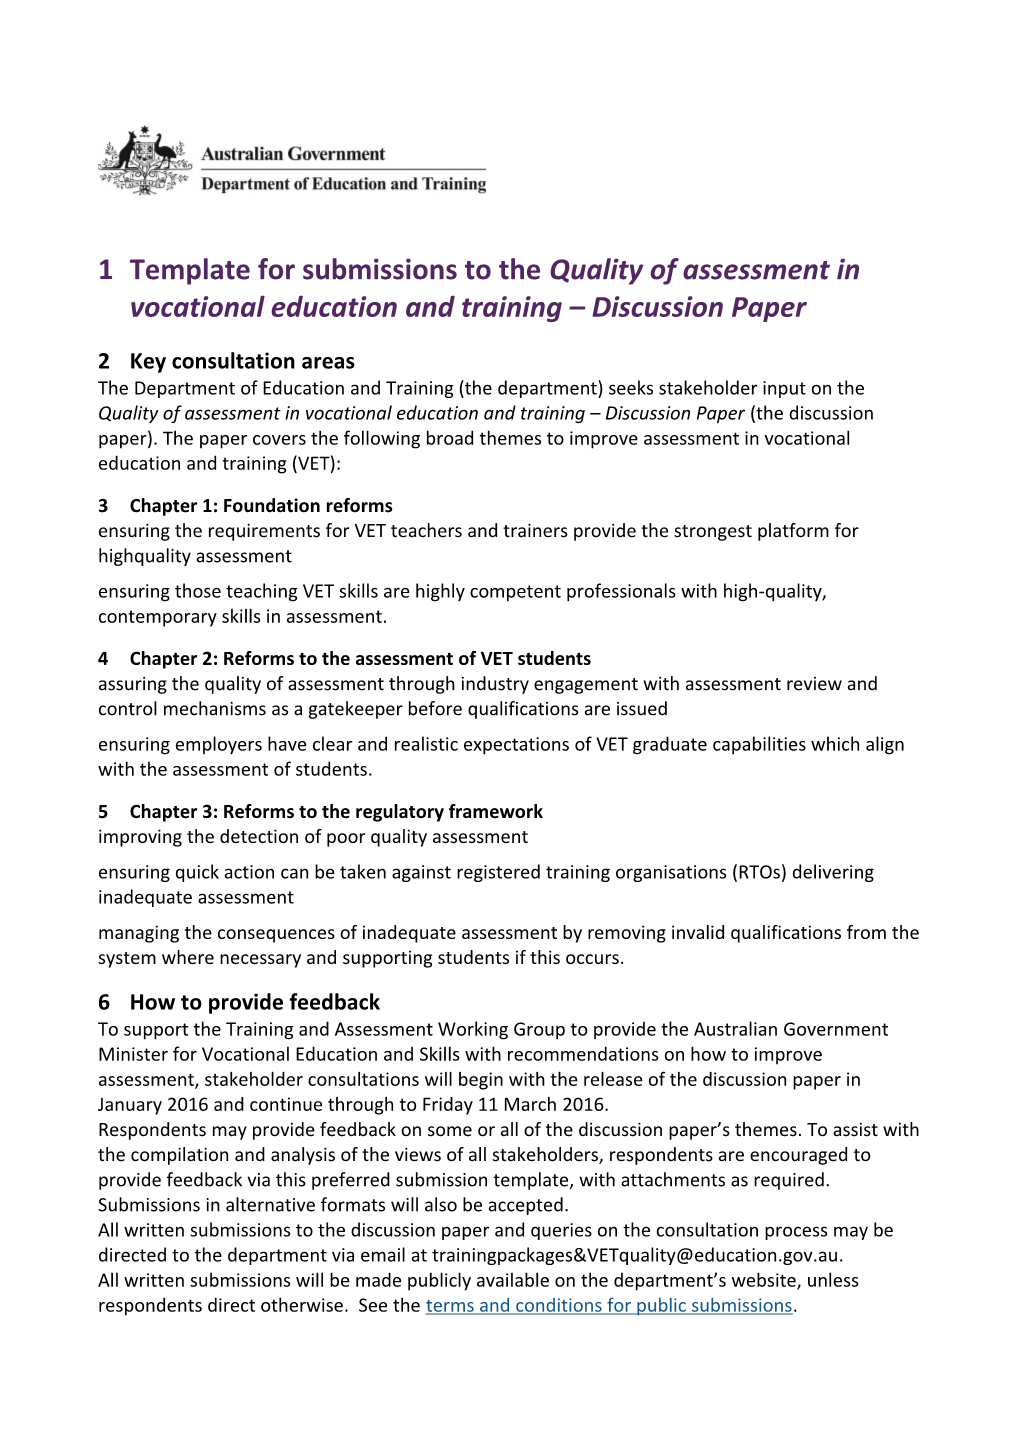 Template for Submissions to the Quality of Assessment in Vocational Education and Training